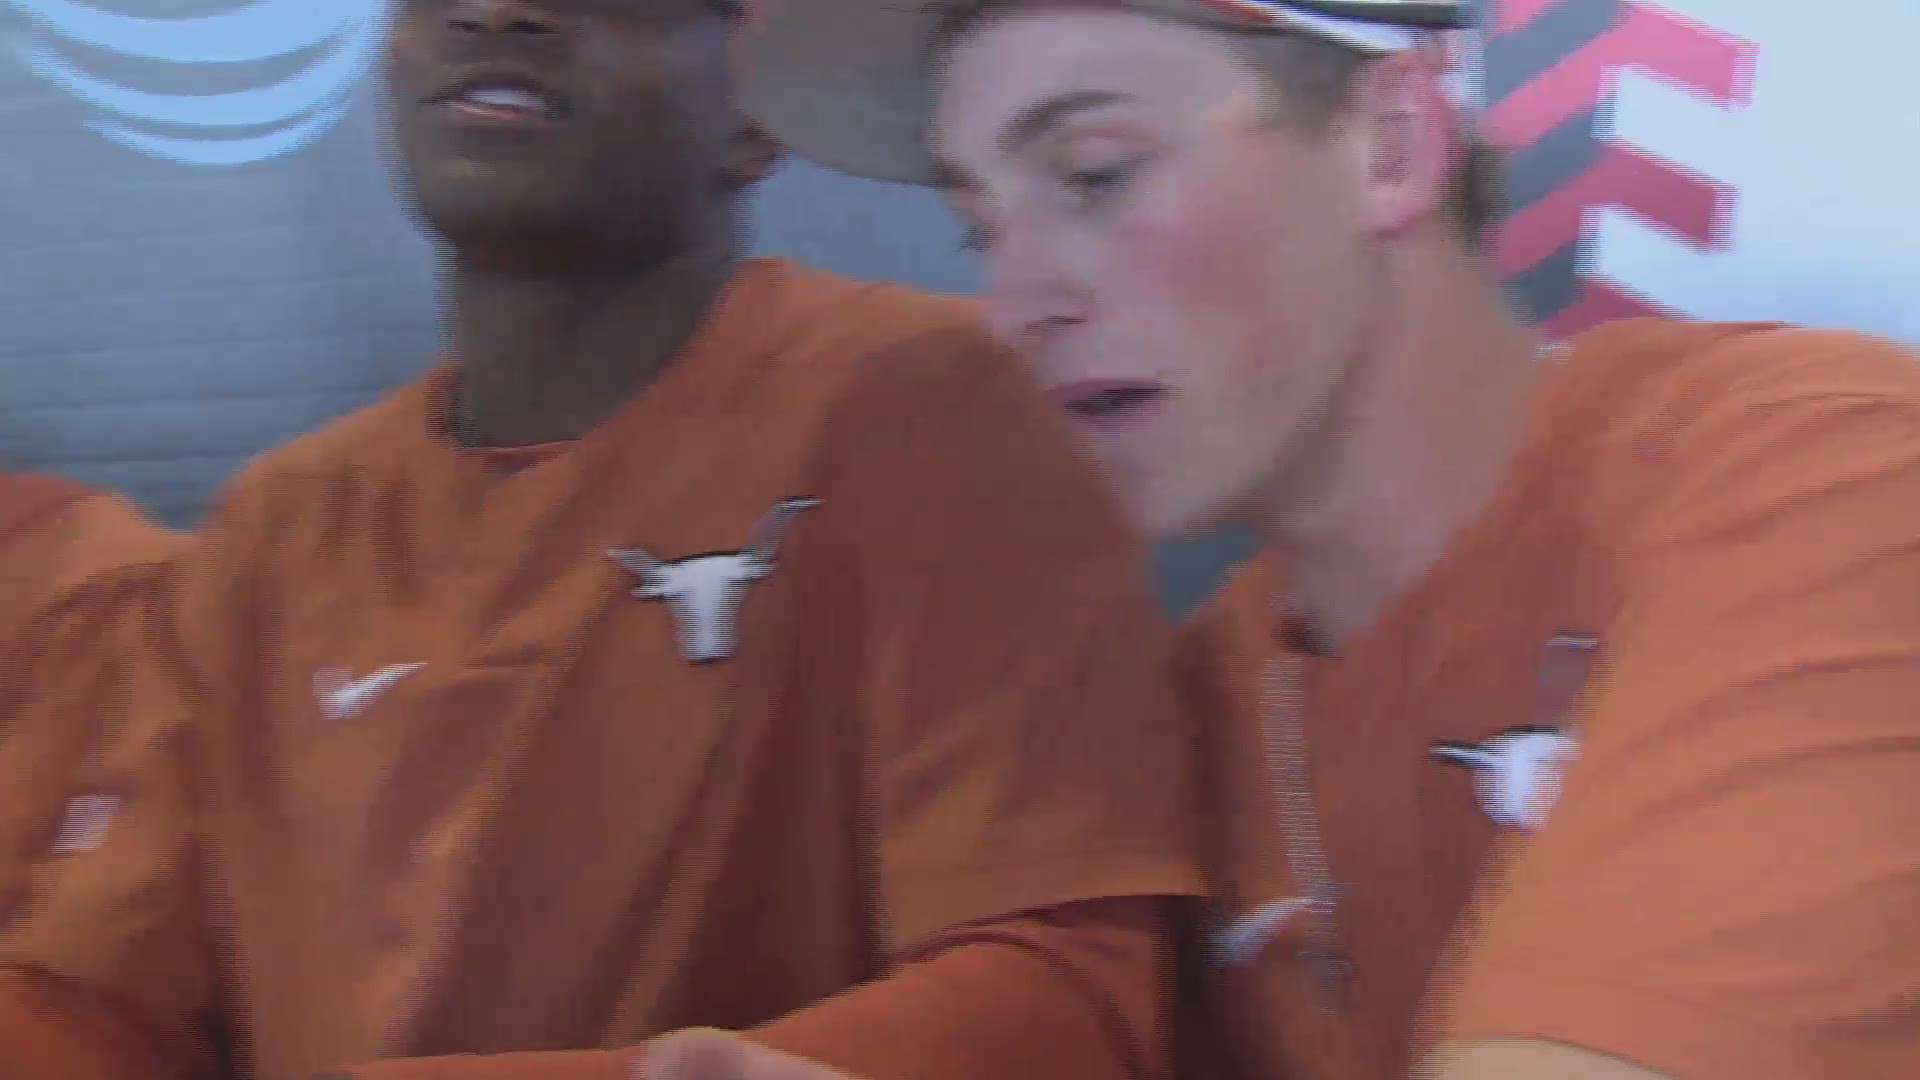 UT spent their 1st full day at TD Ameritrade Park after arriving Thursday afternoon.